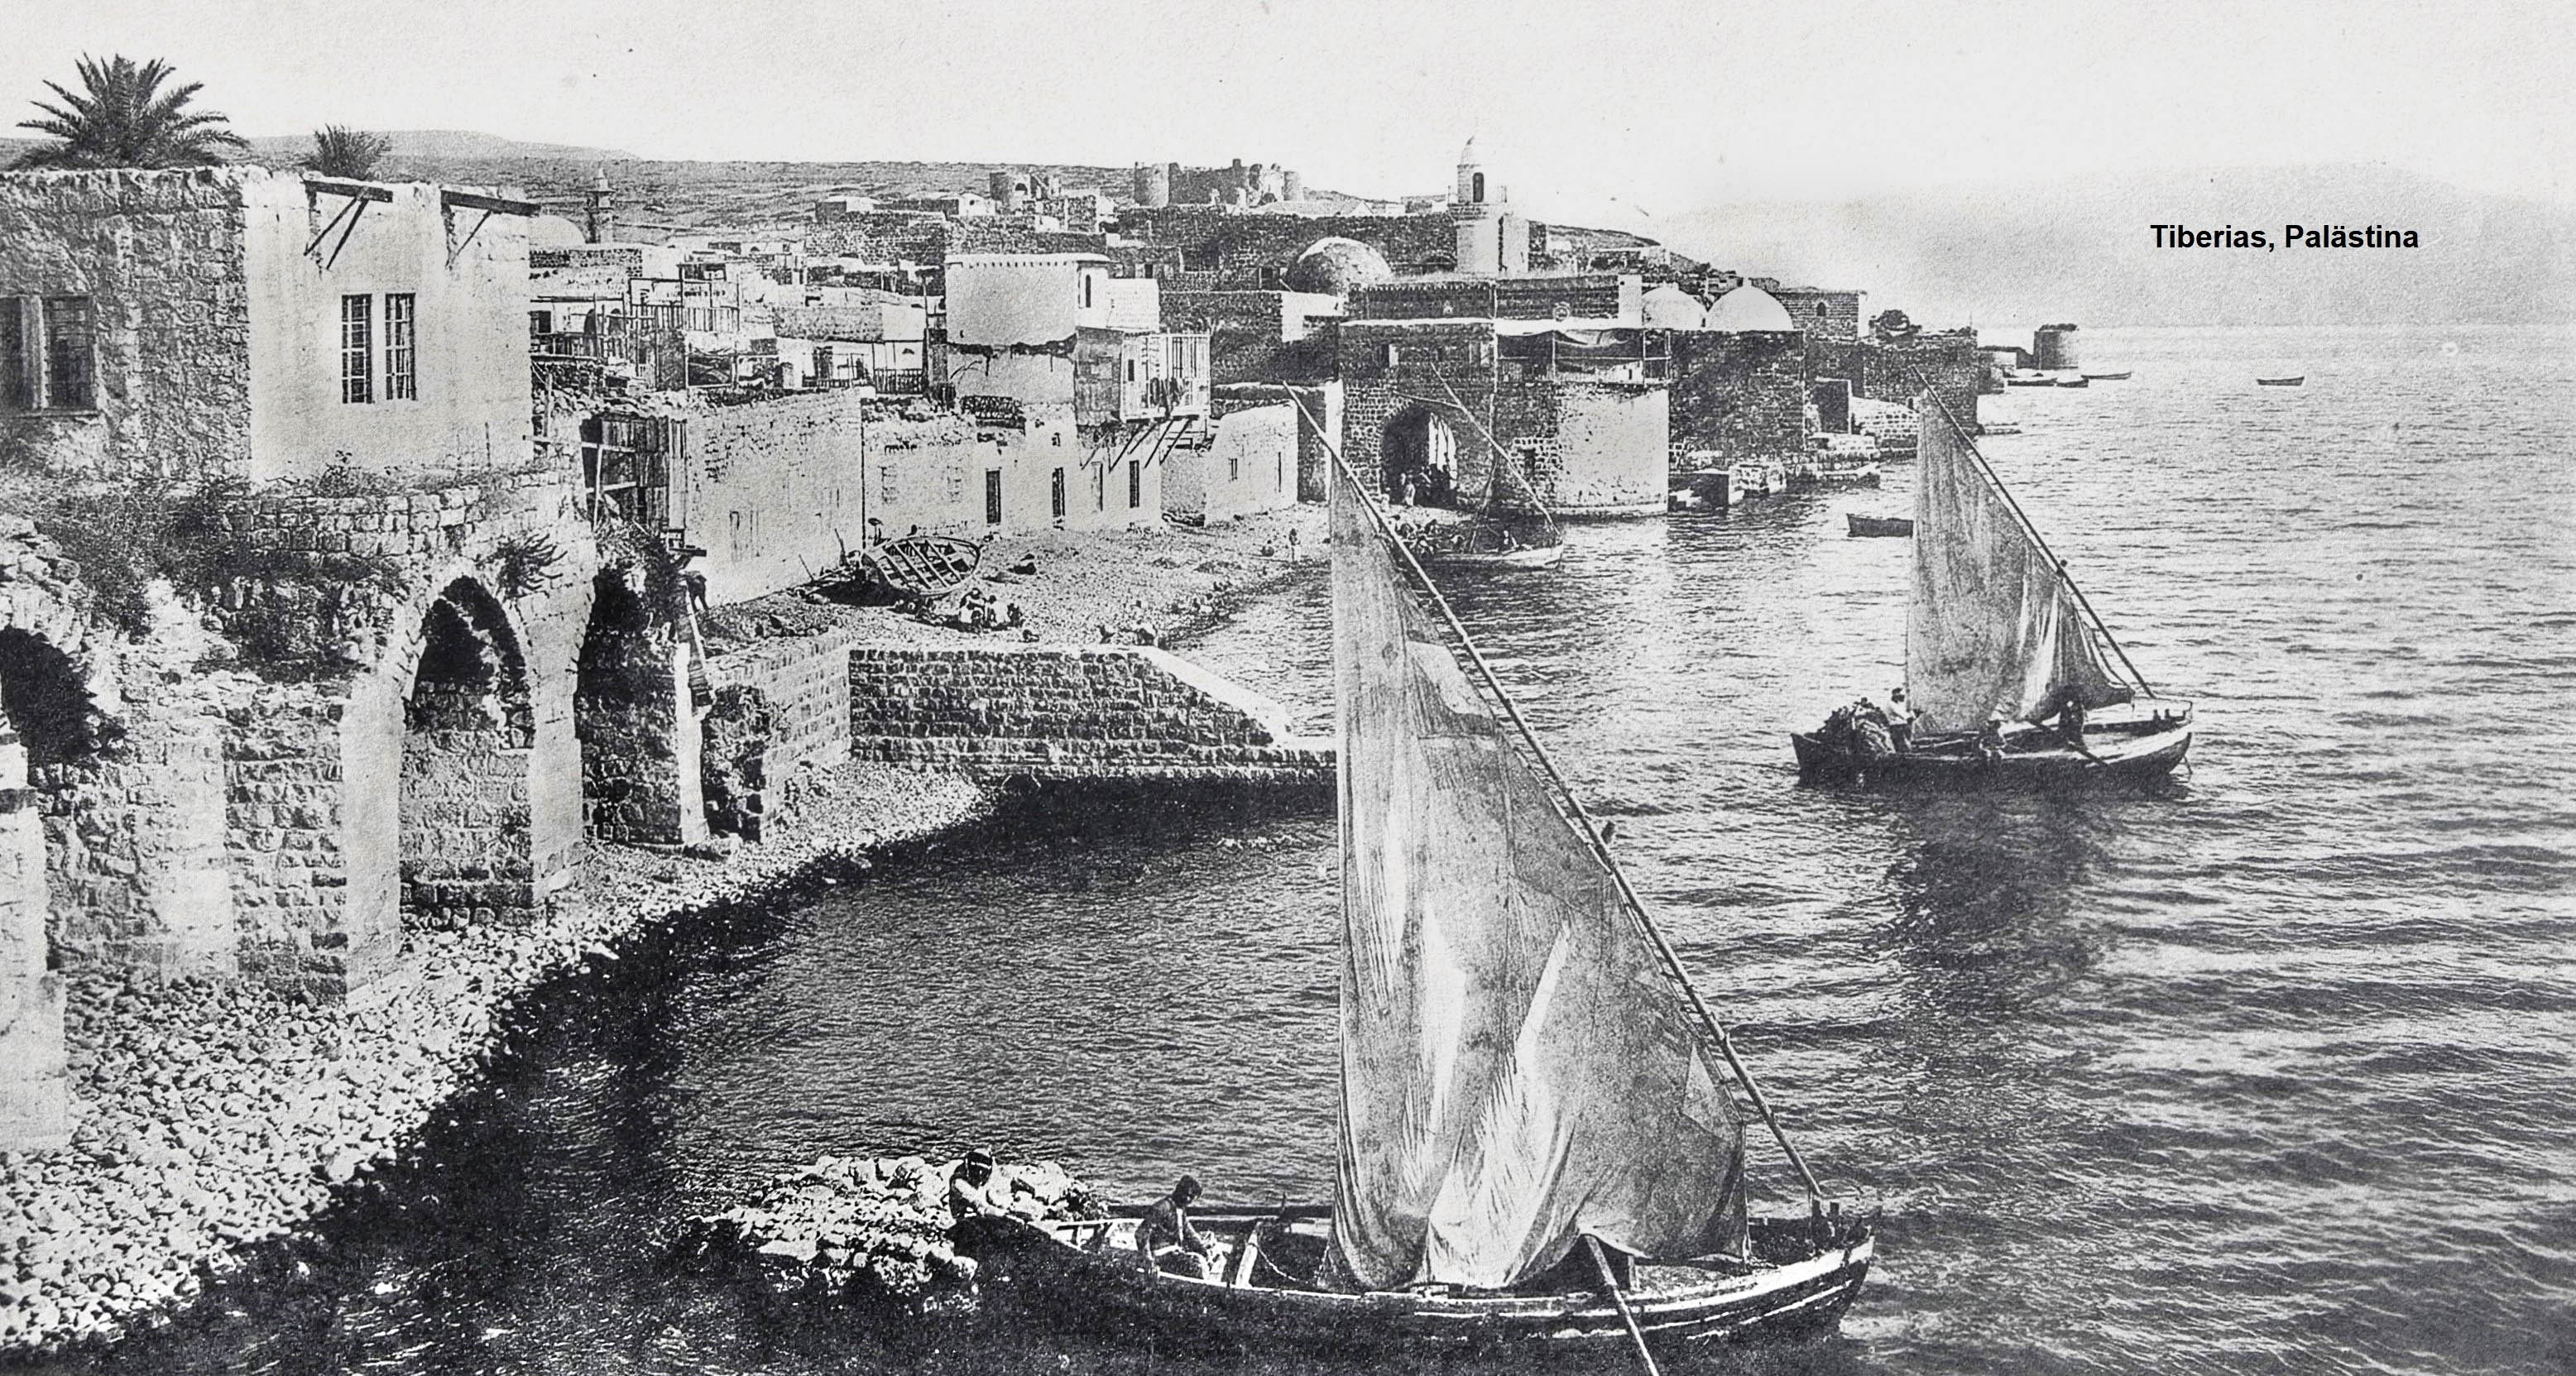 Background Image. A city next to the tiberias lake in Palestine. Black and white from 1918.